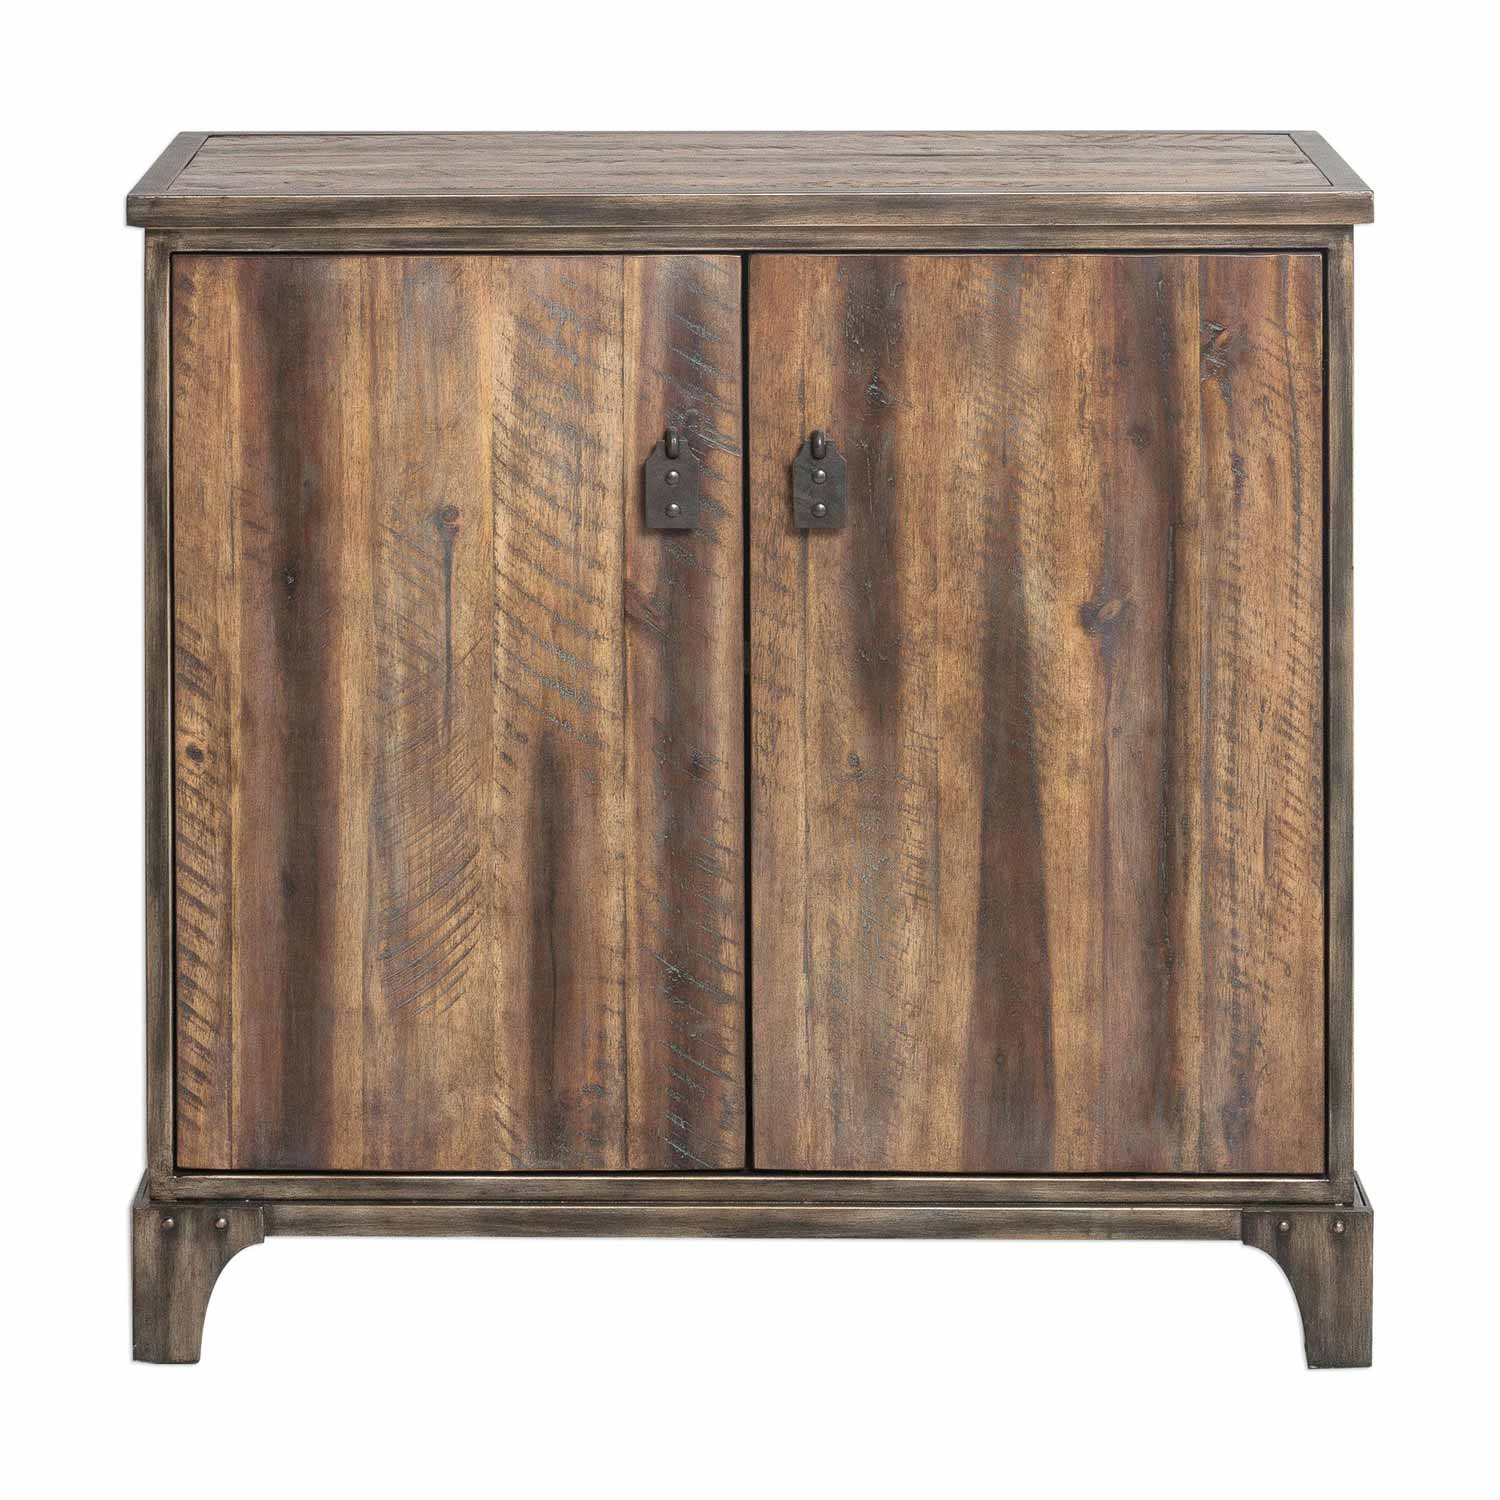 Uttermost Trevin Accent Cabinet - Rustic